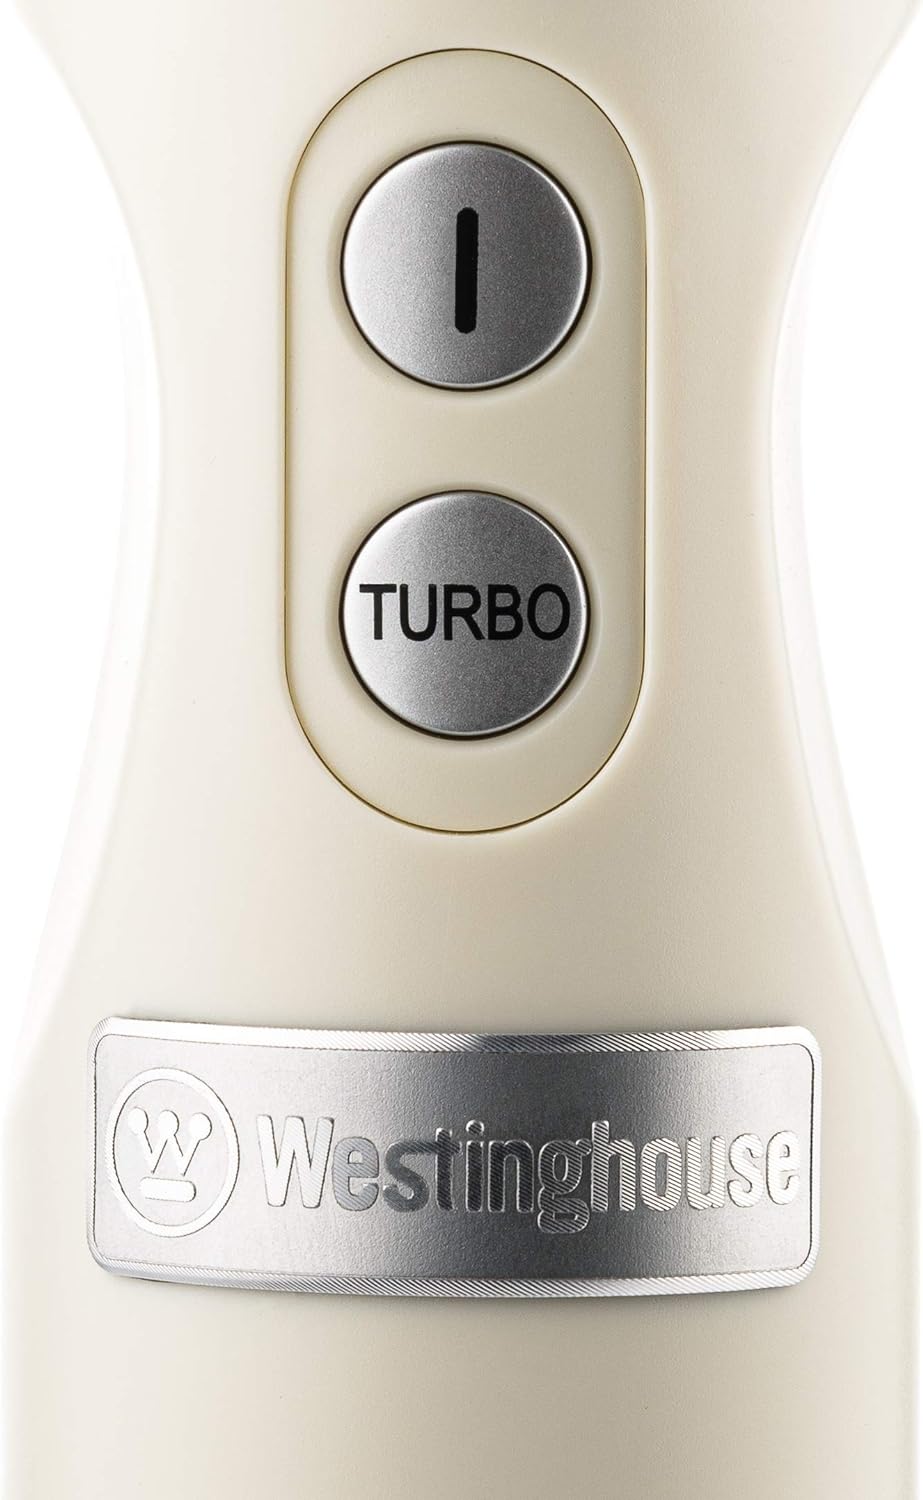 Westinghouse Retro Hand Blender - 600W Handheld Stick Blender for Kitchen - Stainless Steel Electric Soup Blender - Food Mixer with Various Speeds and Turbo Setting - Cream - Amazing Gadgets Outlet